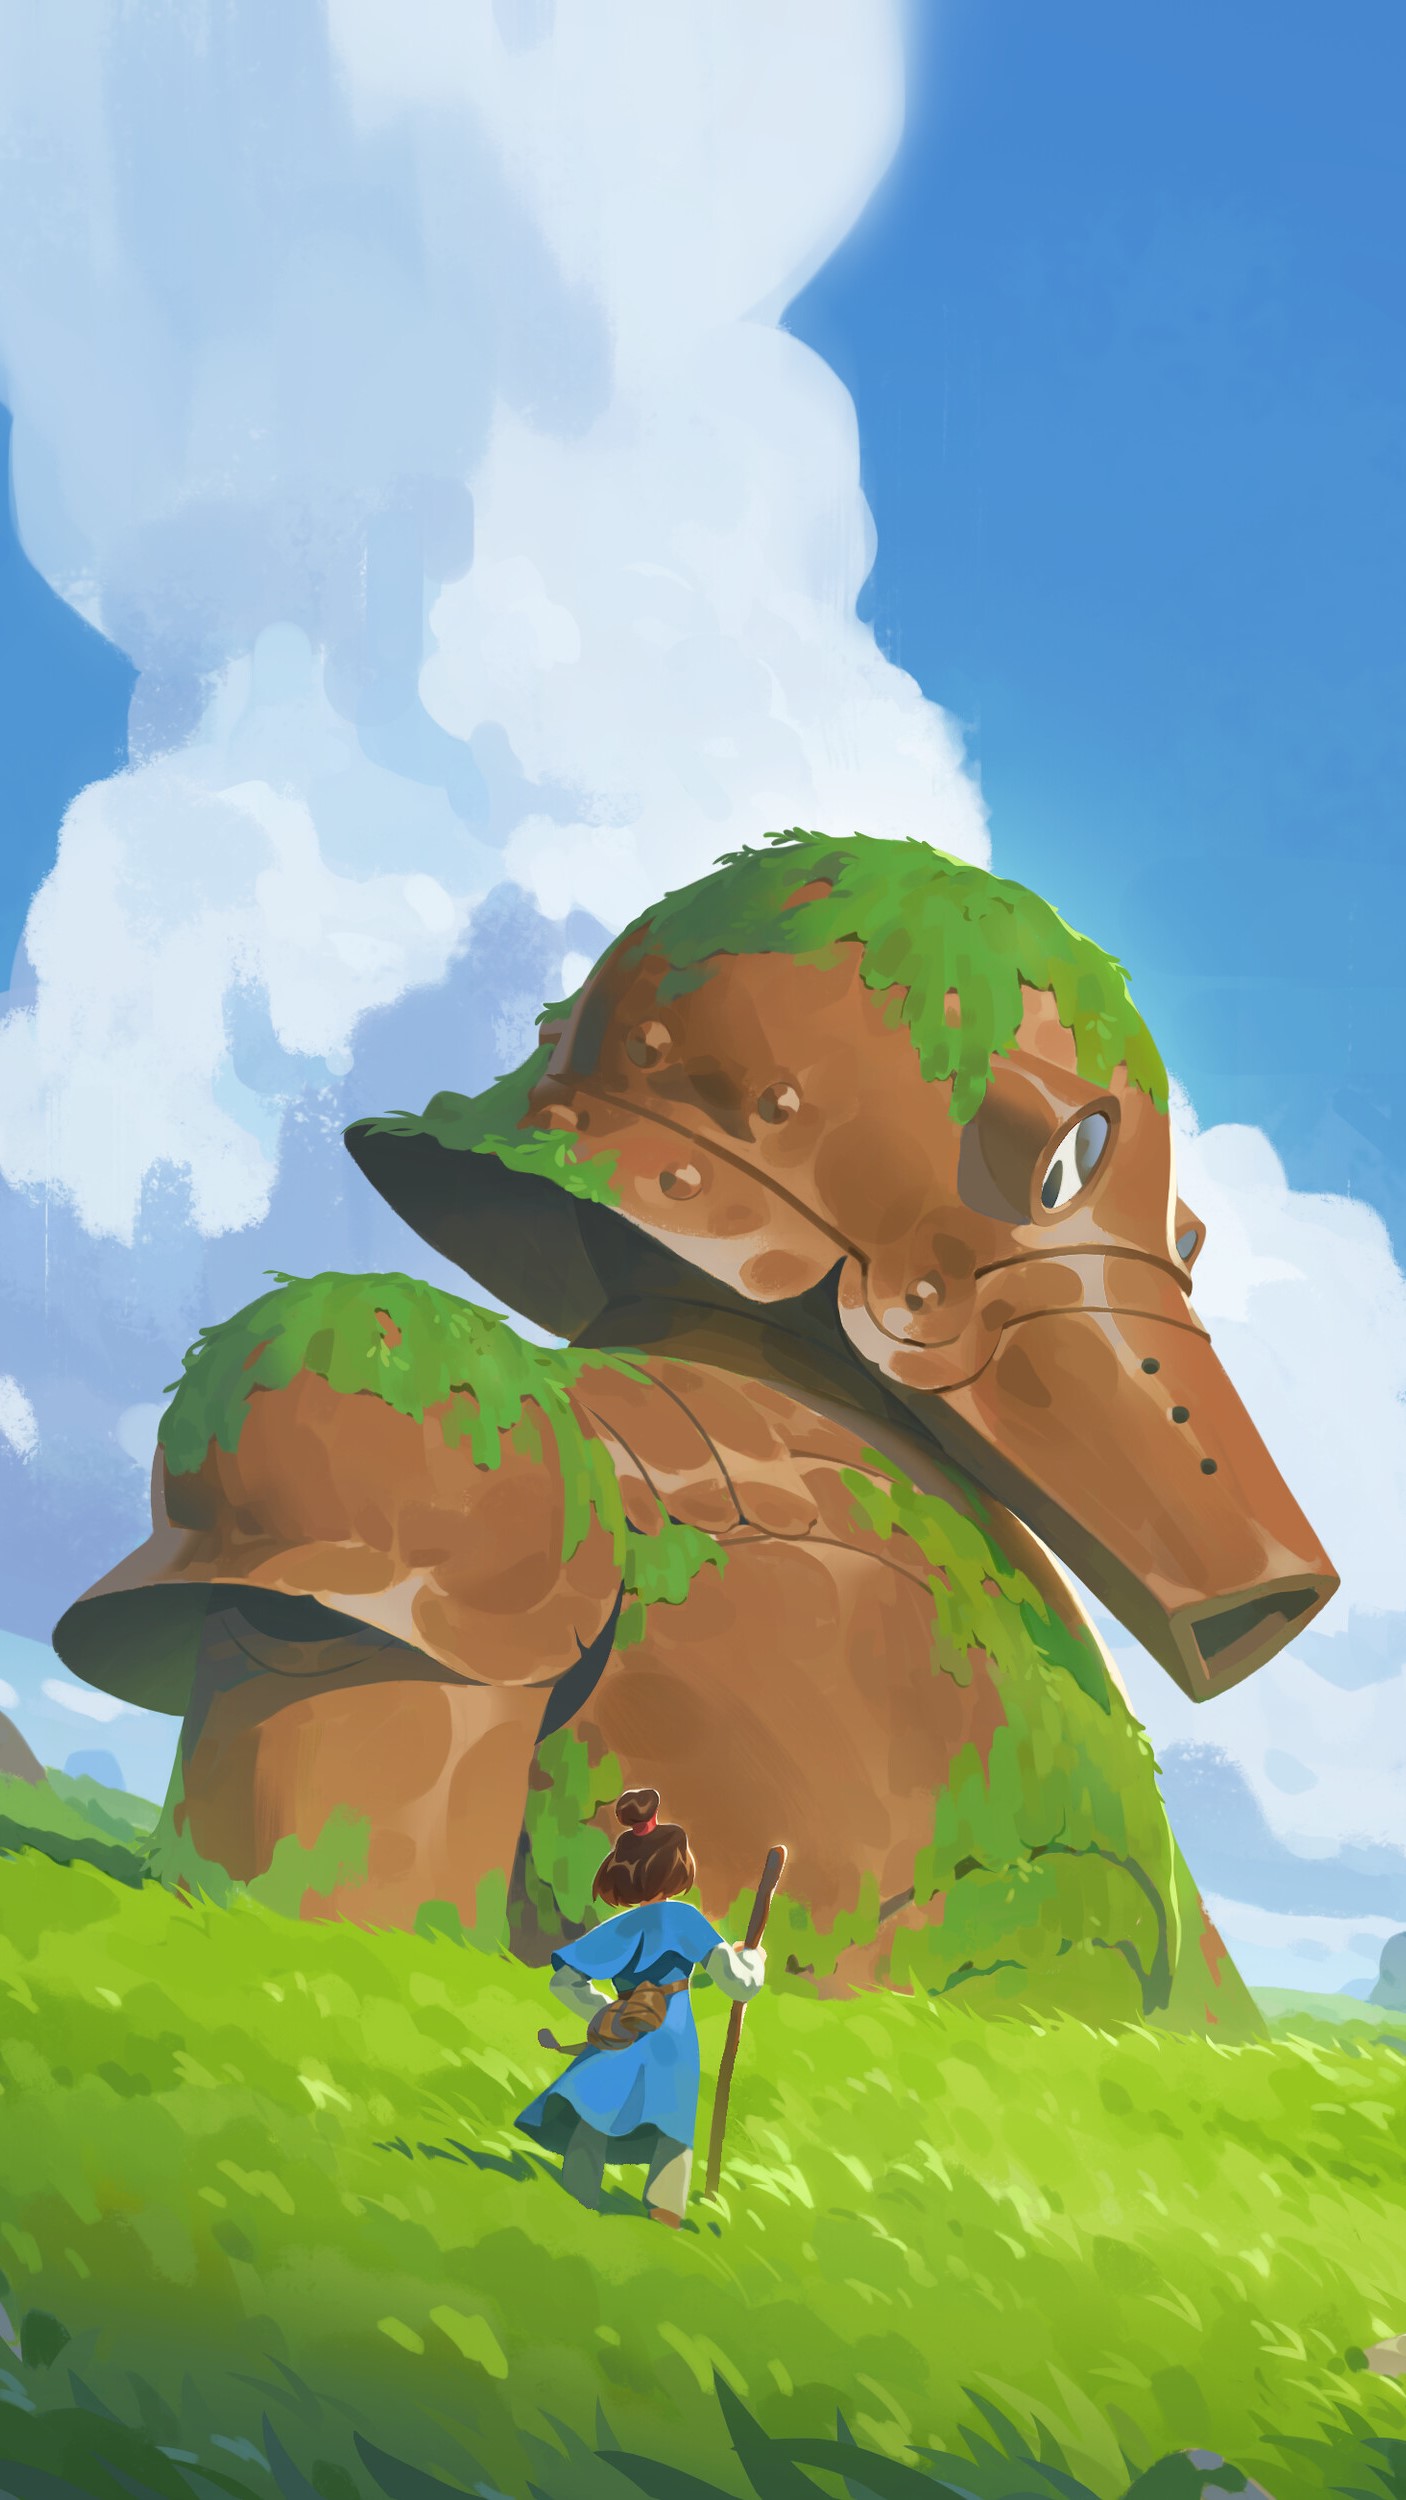 Fantasy landscape phone wallpaper featuring a giant creature with grassy back and a small figure with a staff in the foreground.